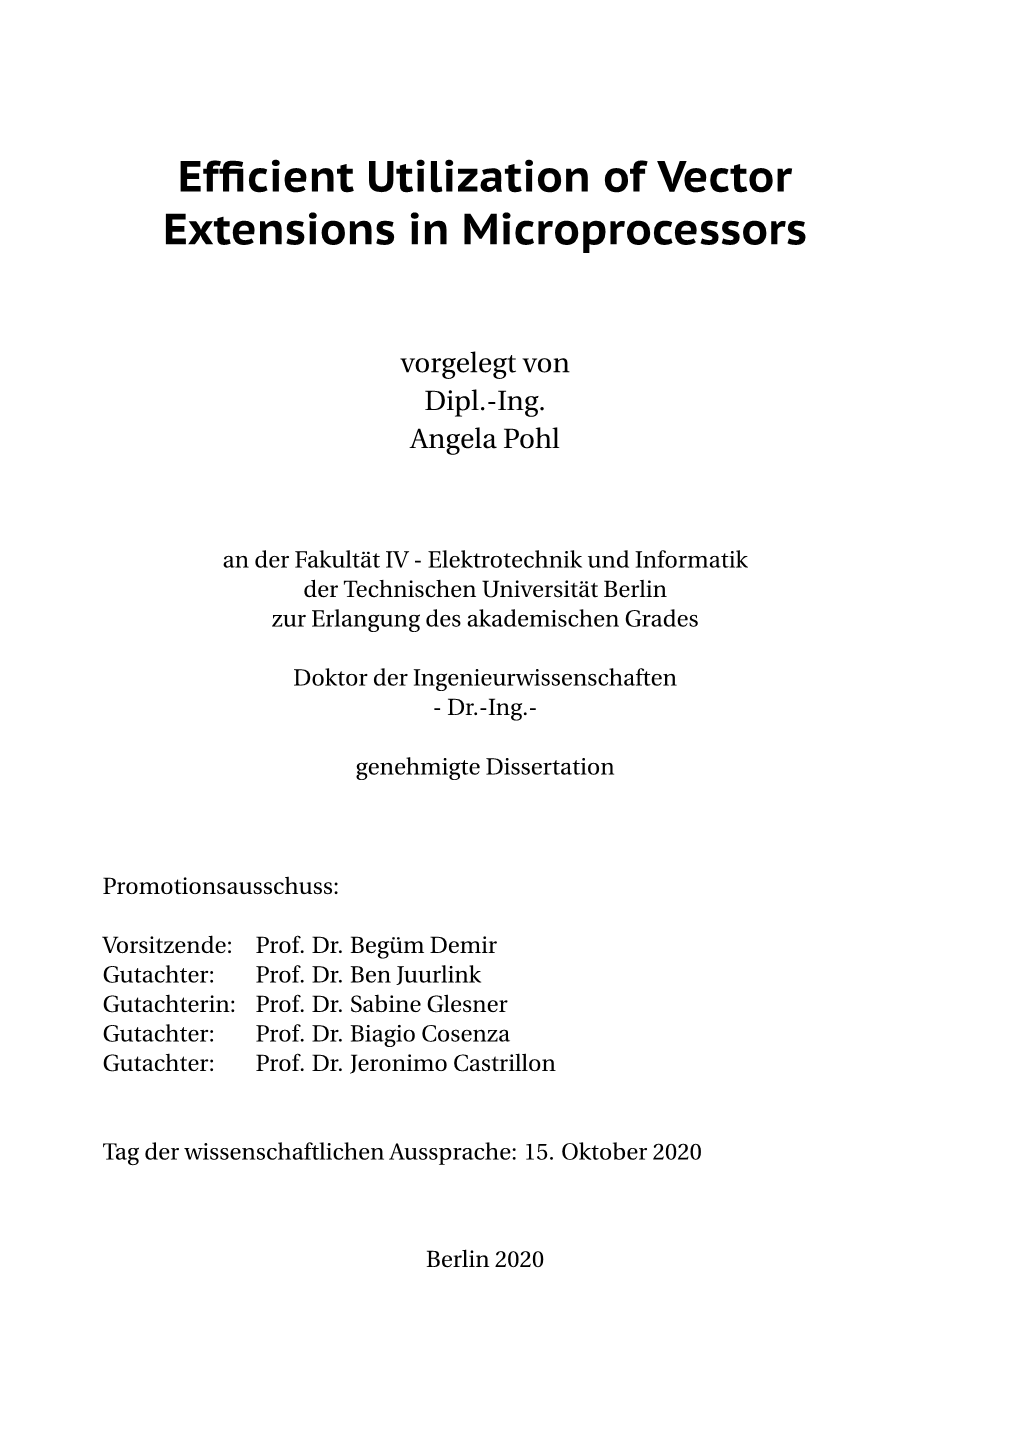 Efficient Utilization of Vector Extensions in Microprocessors